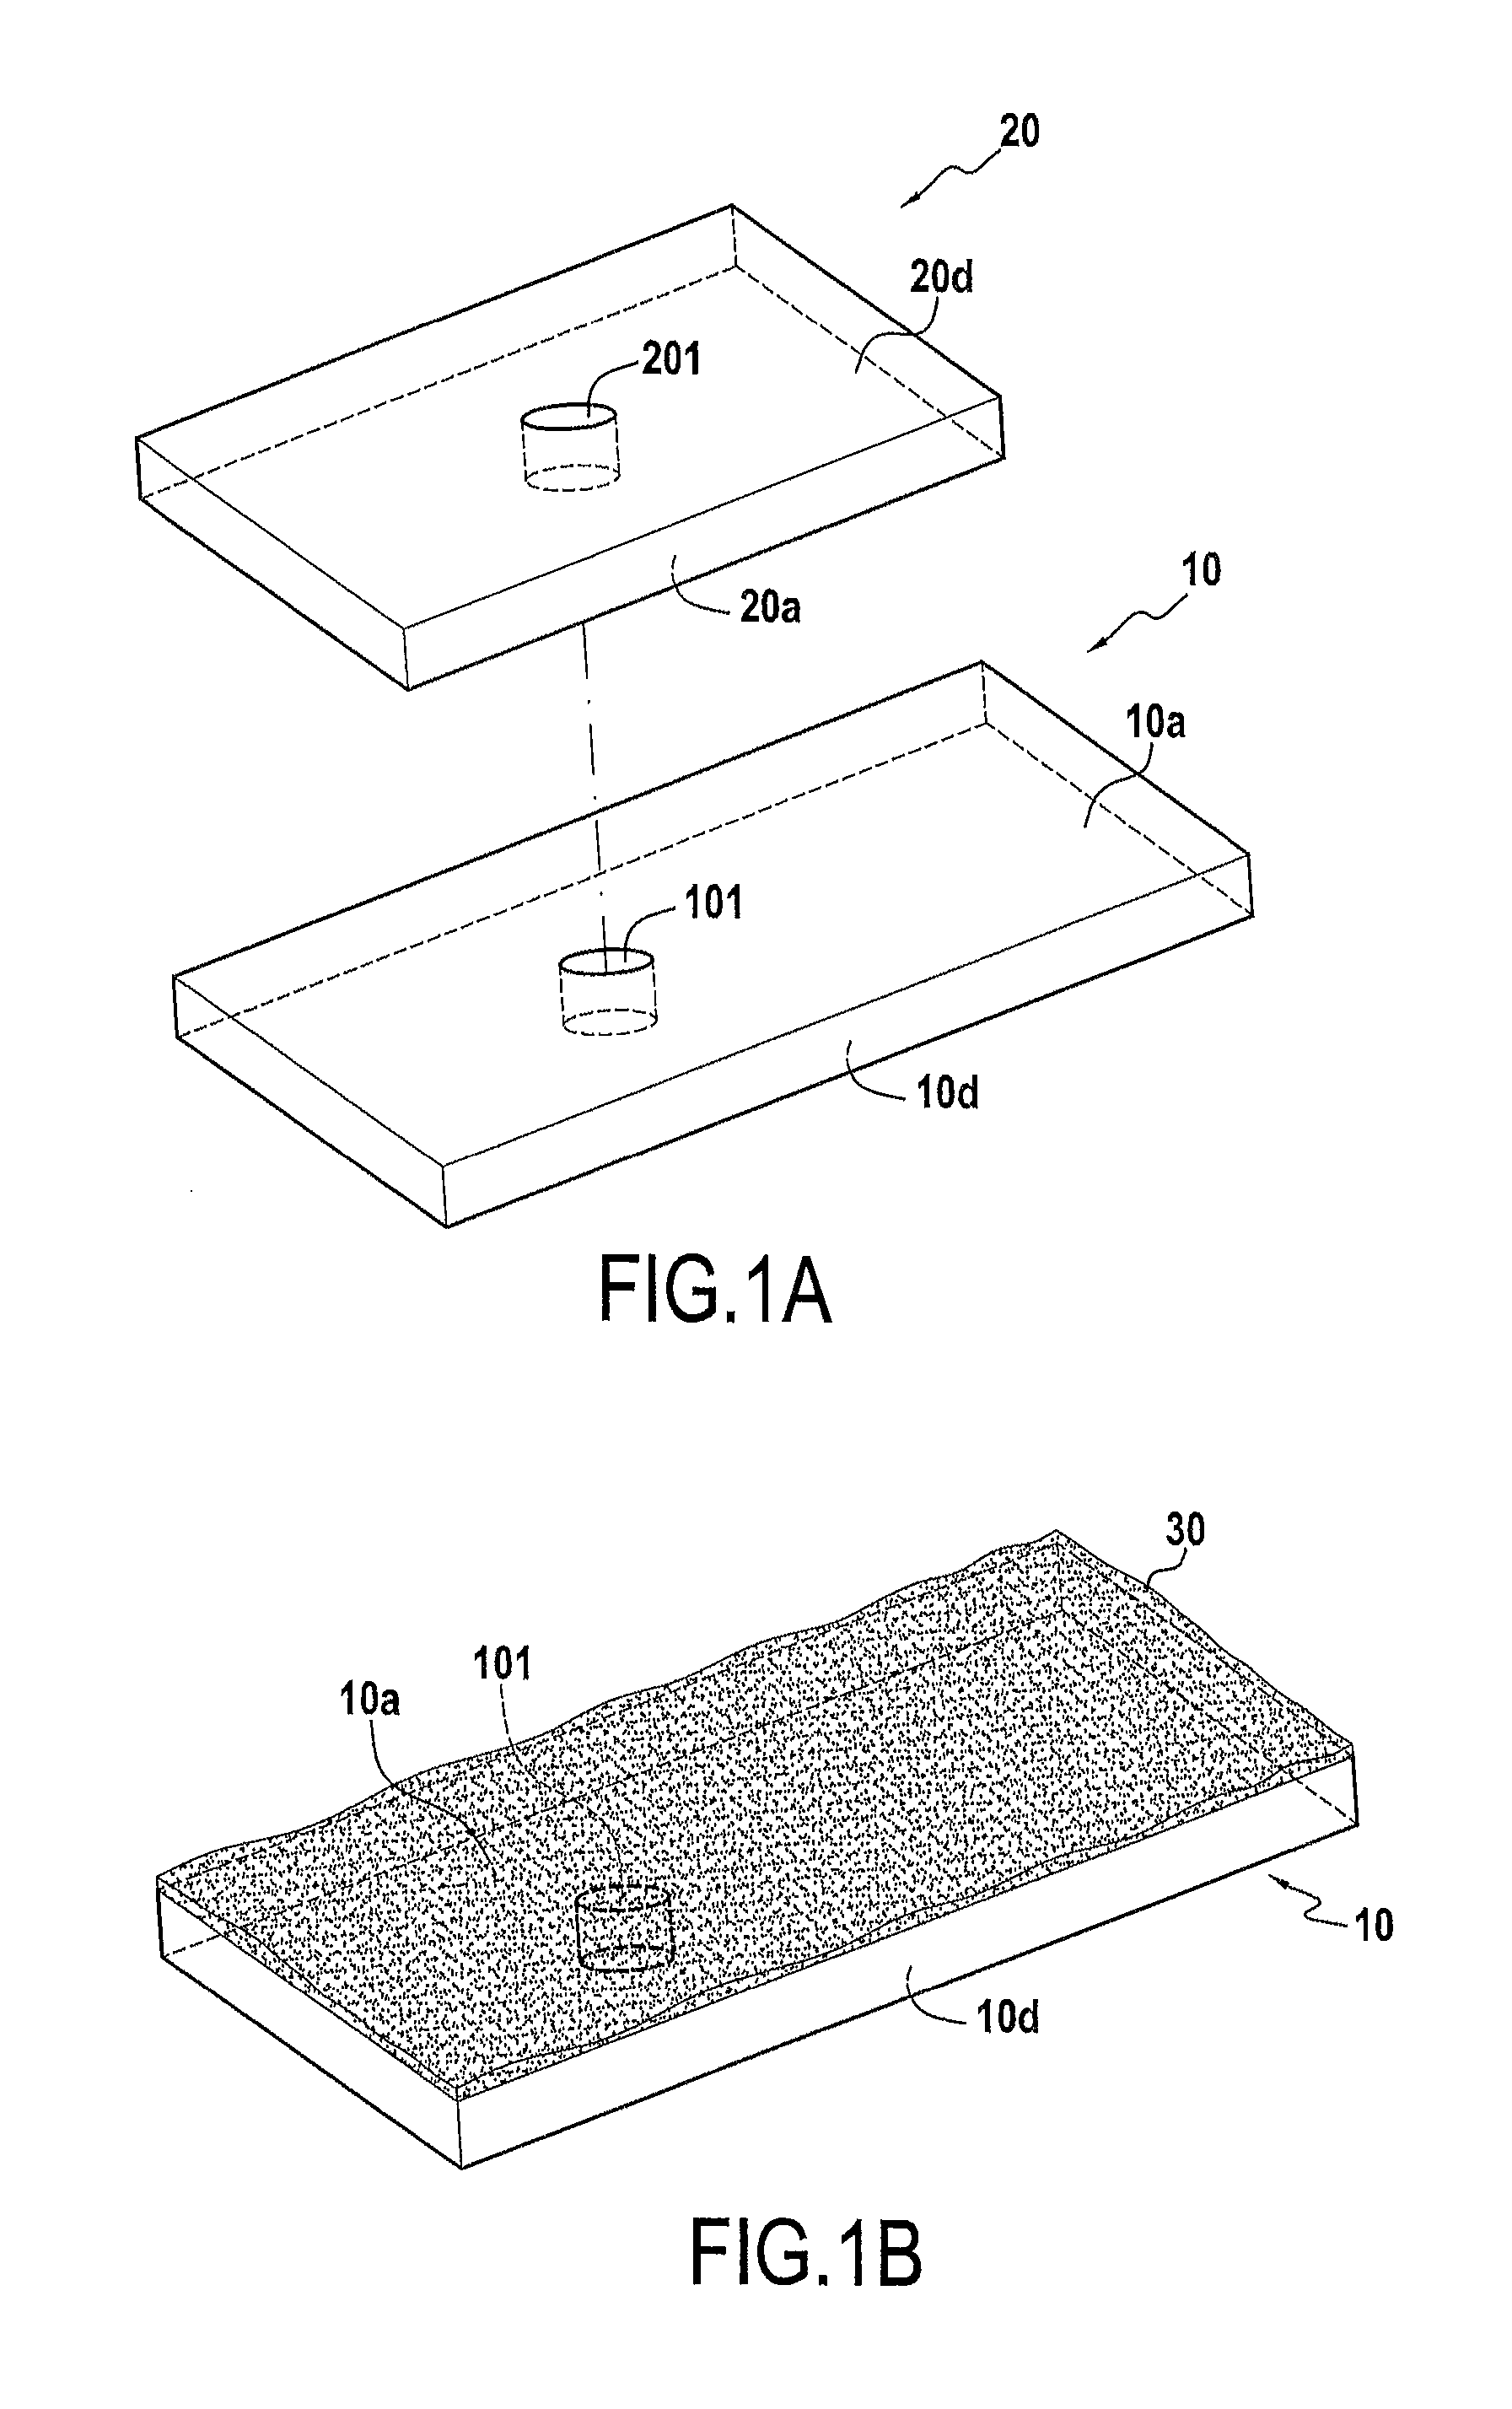 Method for the brazing of parts made from a composite material, incorporating a slug in the bond